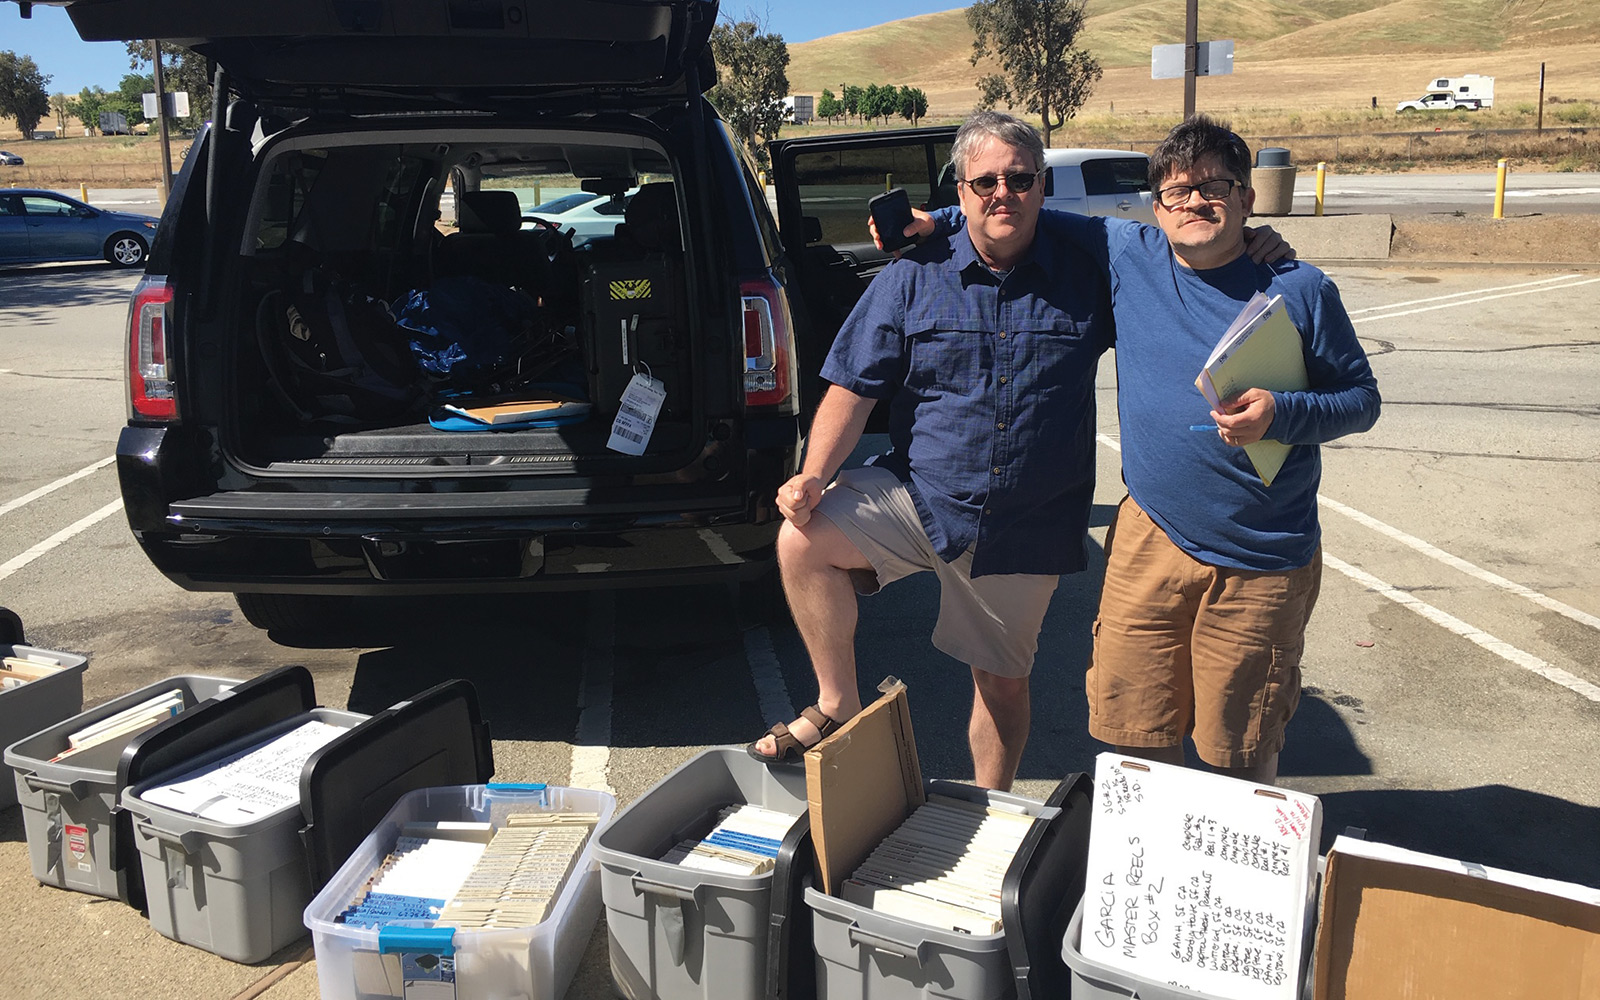 Andy Acker 83 and his friend Jeff Butler personally delivered the reels to Burbank, California.